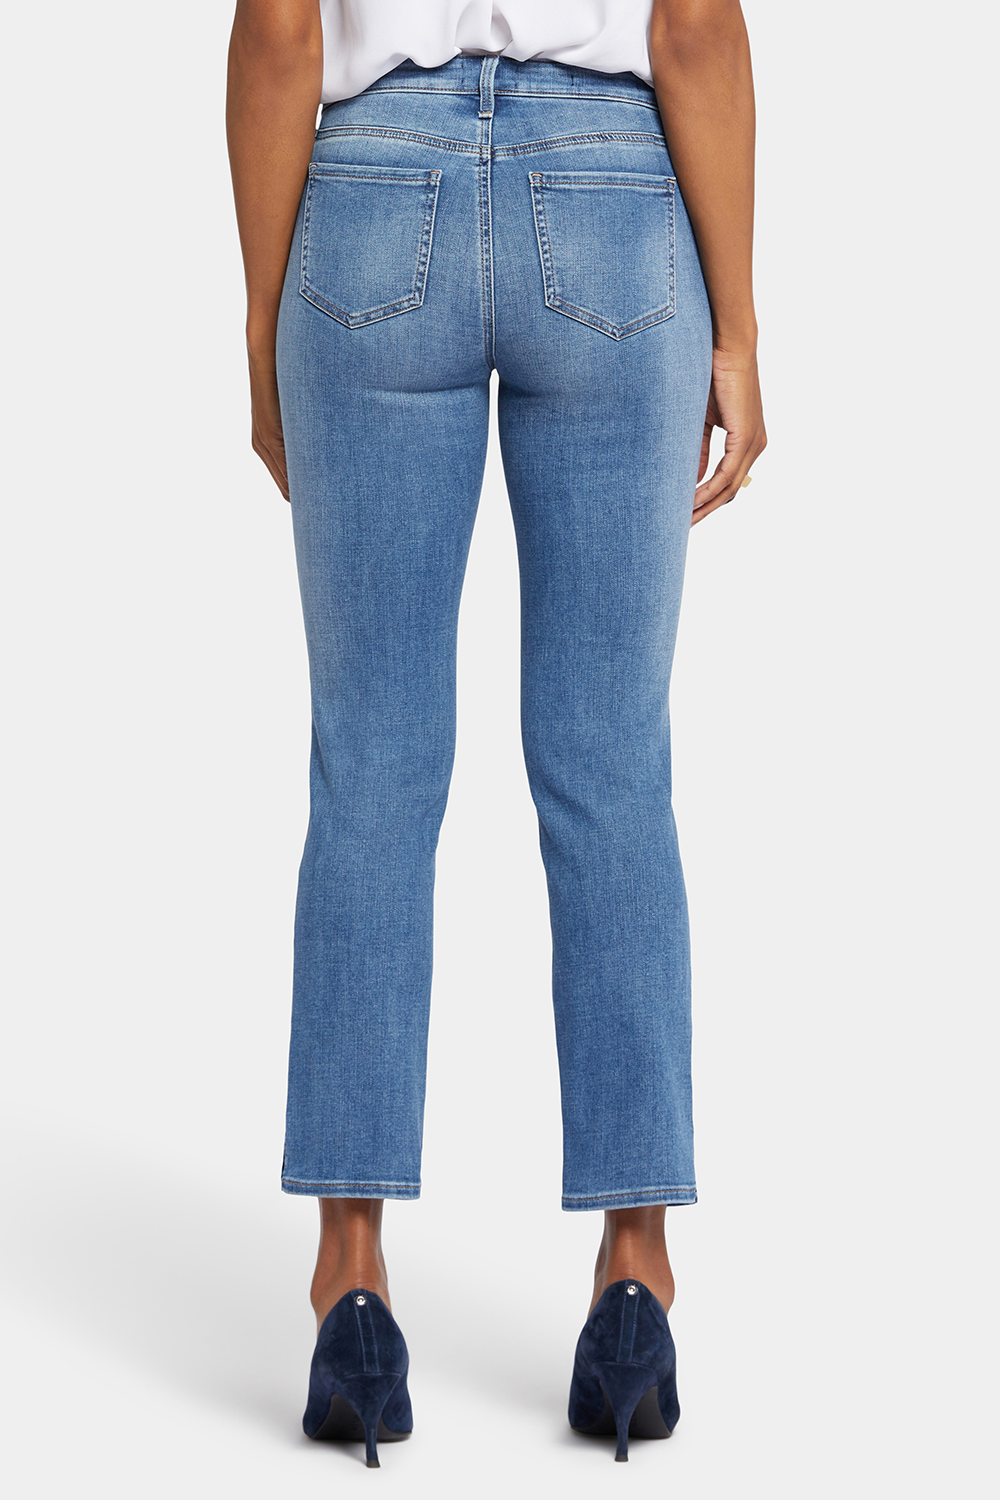 NYDJ Sheri Slim Ankle Jeans In Petite With Riveted Side Slits - Maele